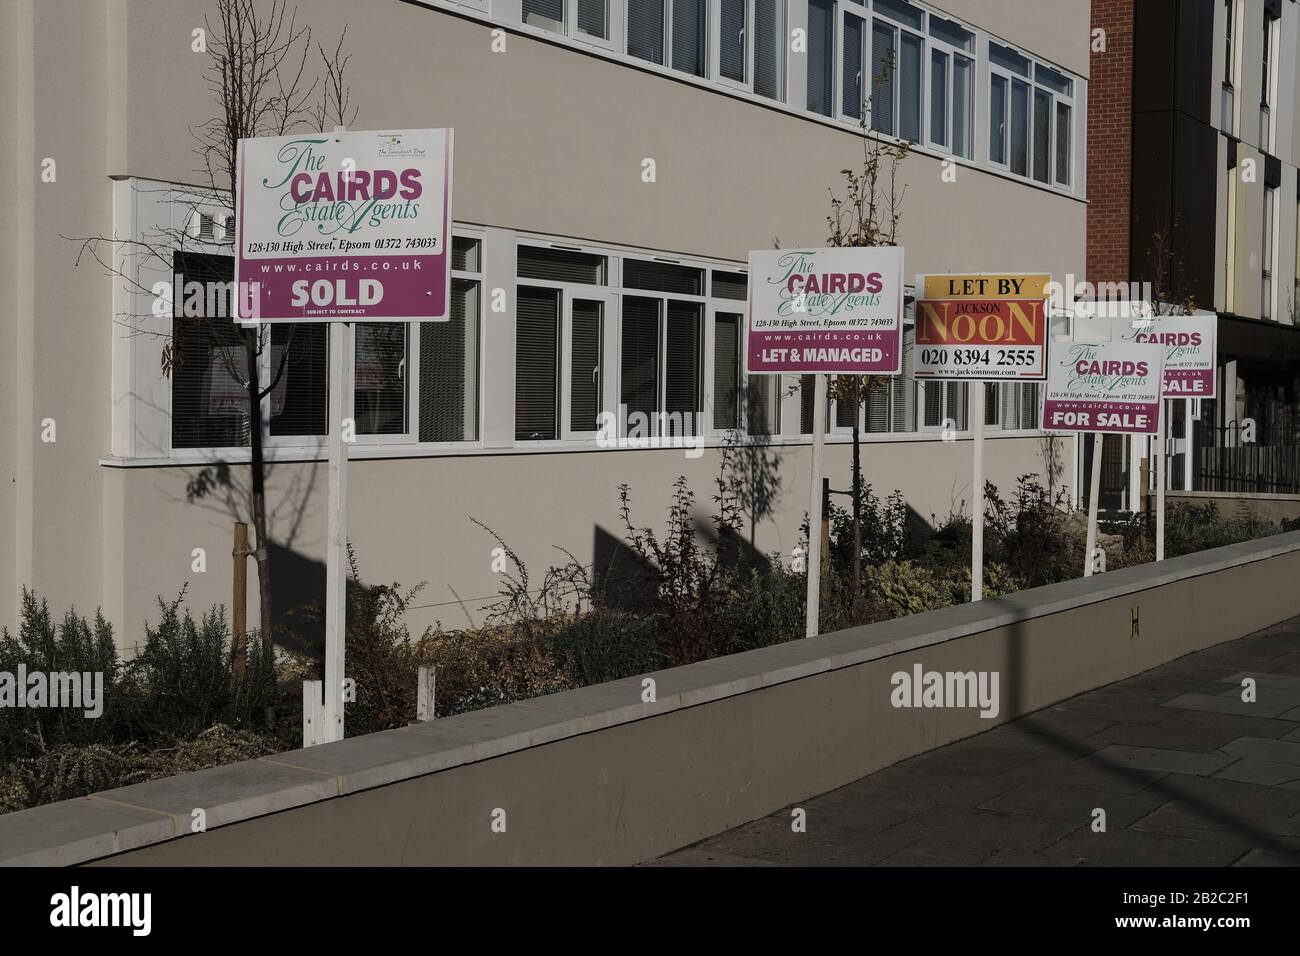 Propertry prices- for sale, sold and to let signs ,Epsom,Lonondon Stock Photo